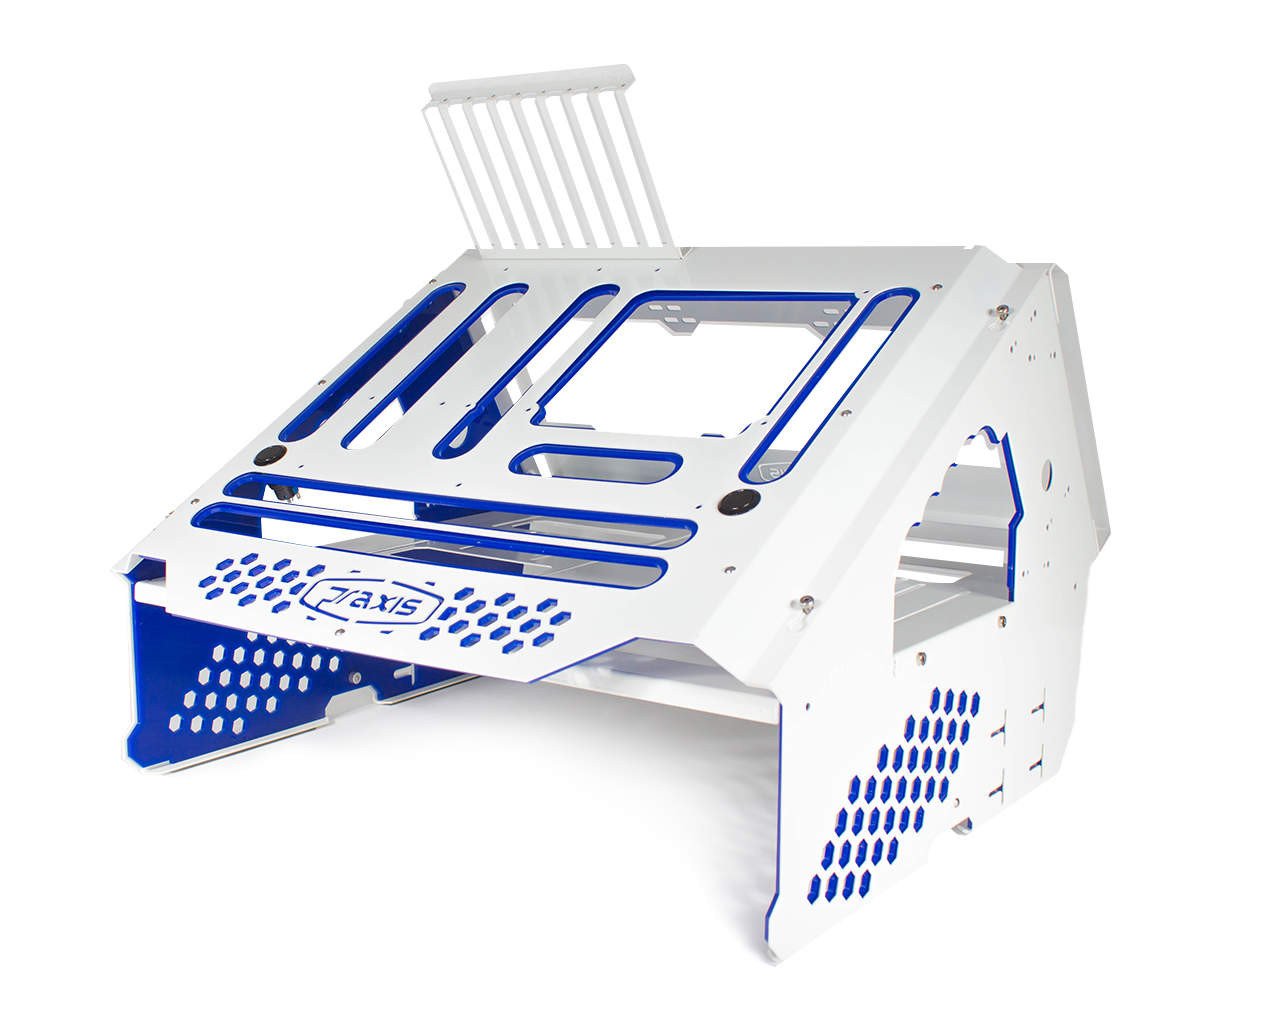 PrimoChill's Praxis Wetbench Powdercoated Steel Modular Open Air Computer Test Bench for Watercooling or Air Cooled Components - PrimoChill - KEEPING IT COOL White w/Solid Blue Accents